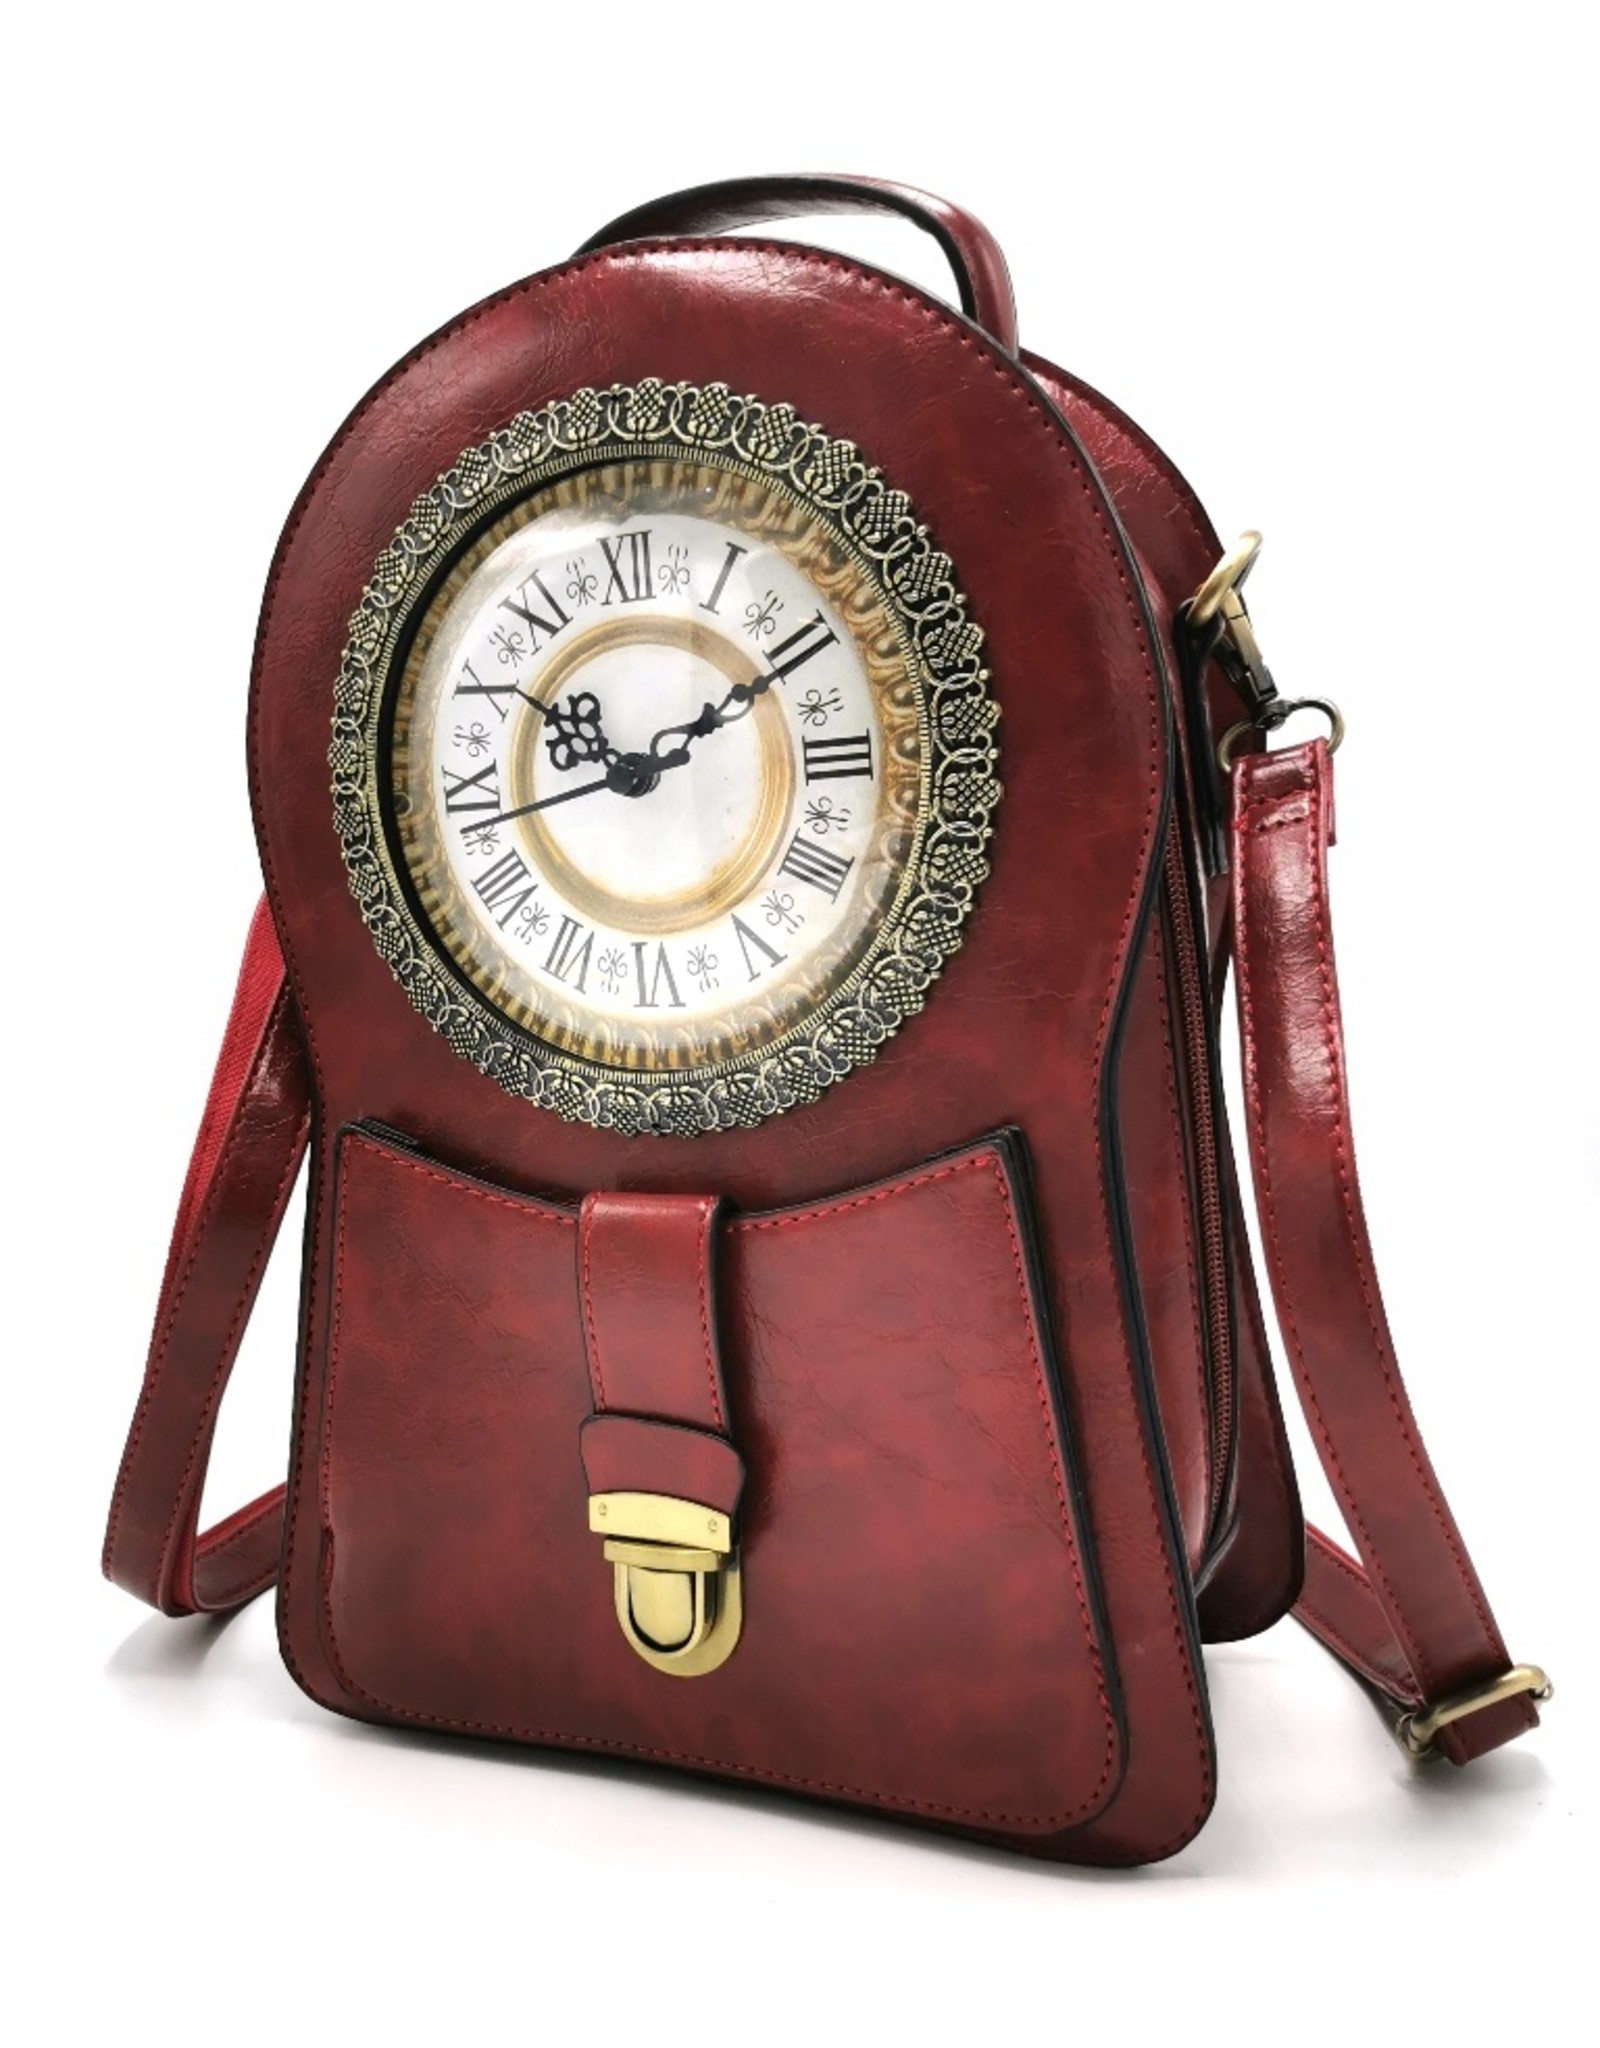 Magic Bags Gothic bags Steampunk bags - Steampunk Backpack with Real Working Clock d.red